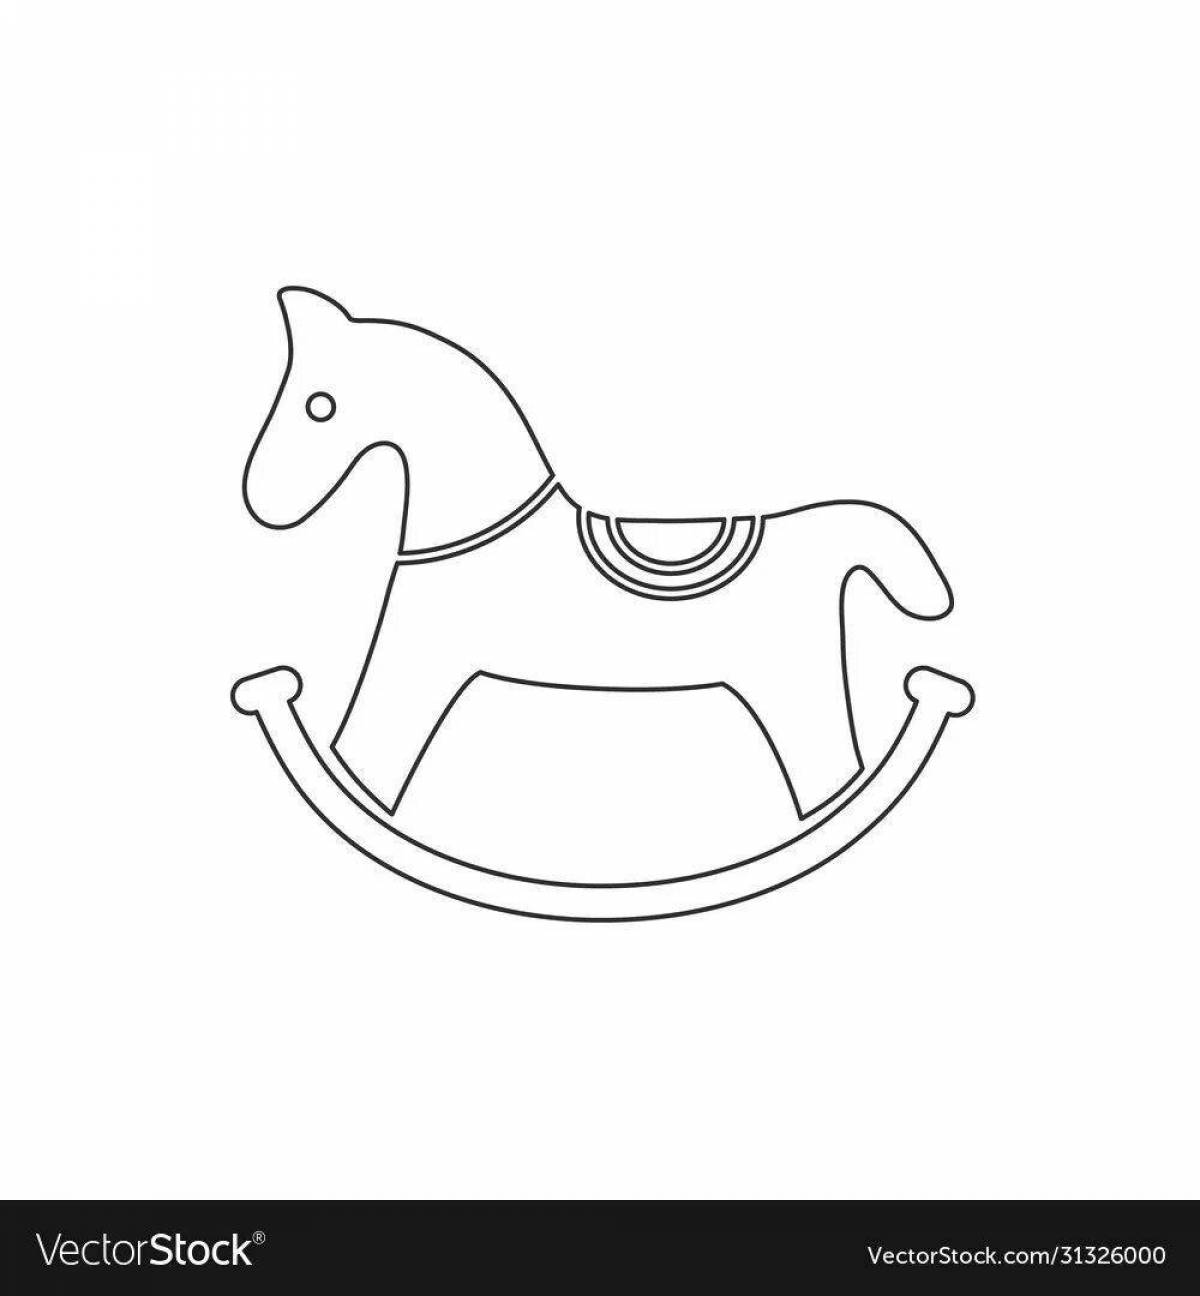 Funny rocking horse coloring book for kids